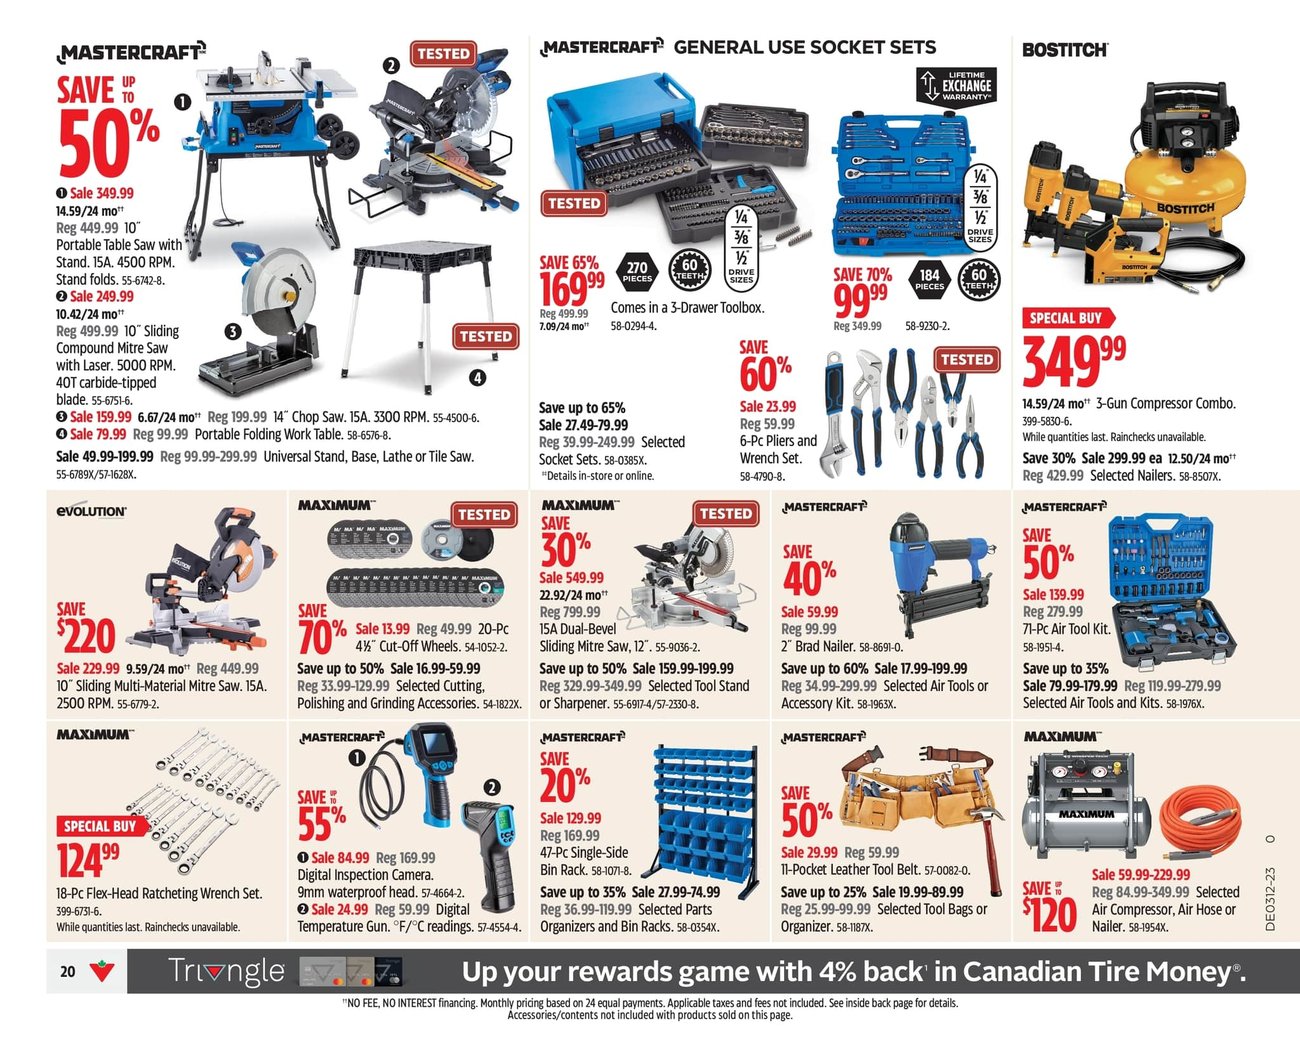 Canadian Tire - Weekly Flyer Specials - Page 23